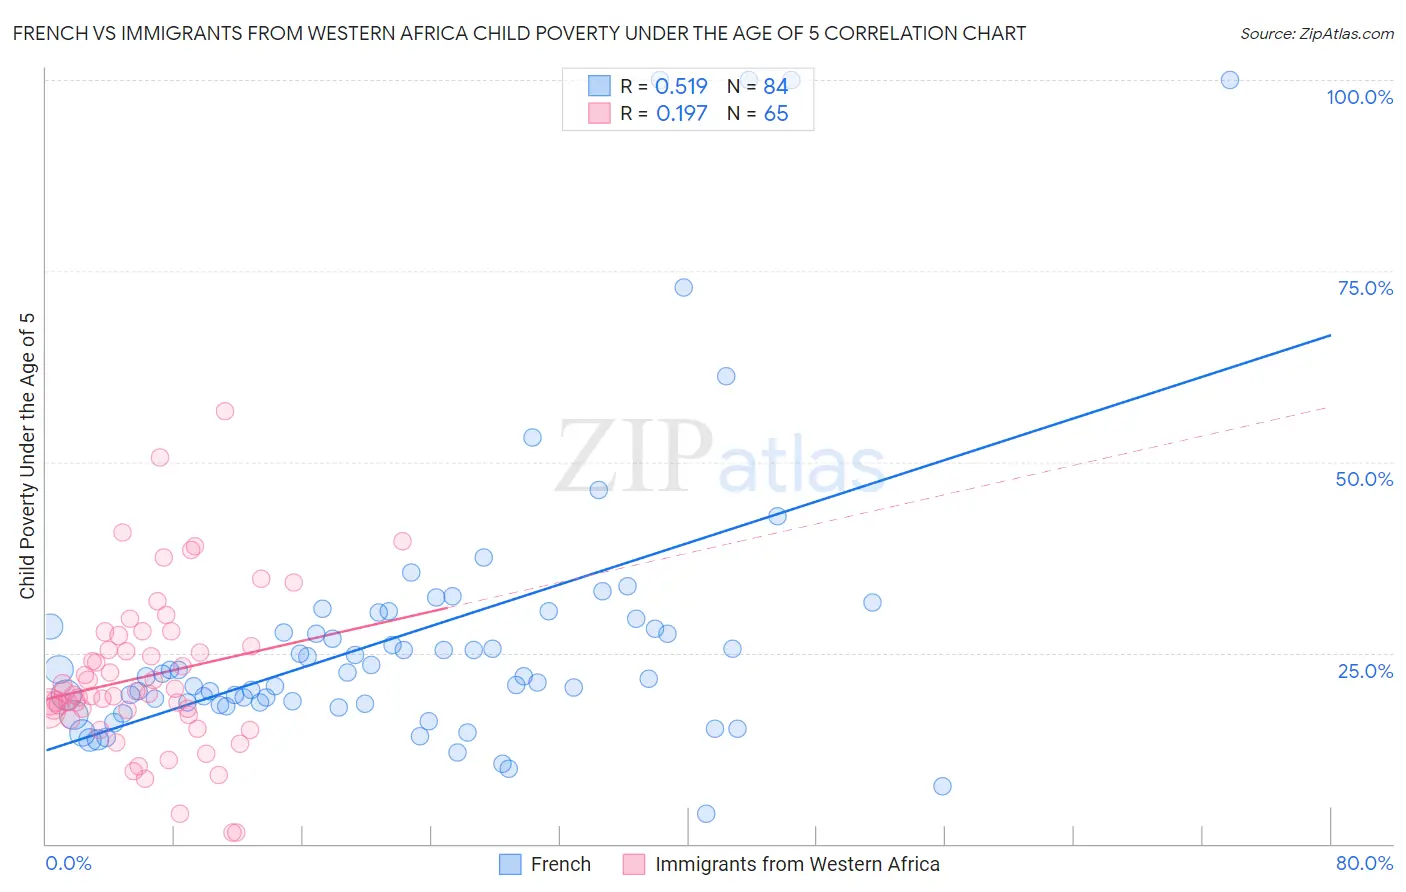 French vs Immigrants from Western Africa Child Poverty Under the Age of 5